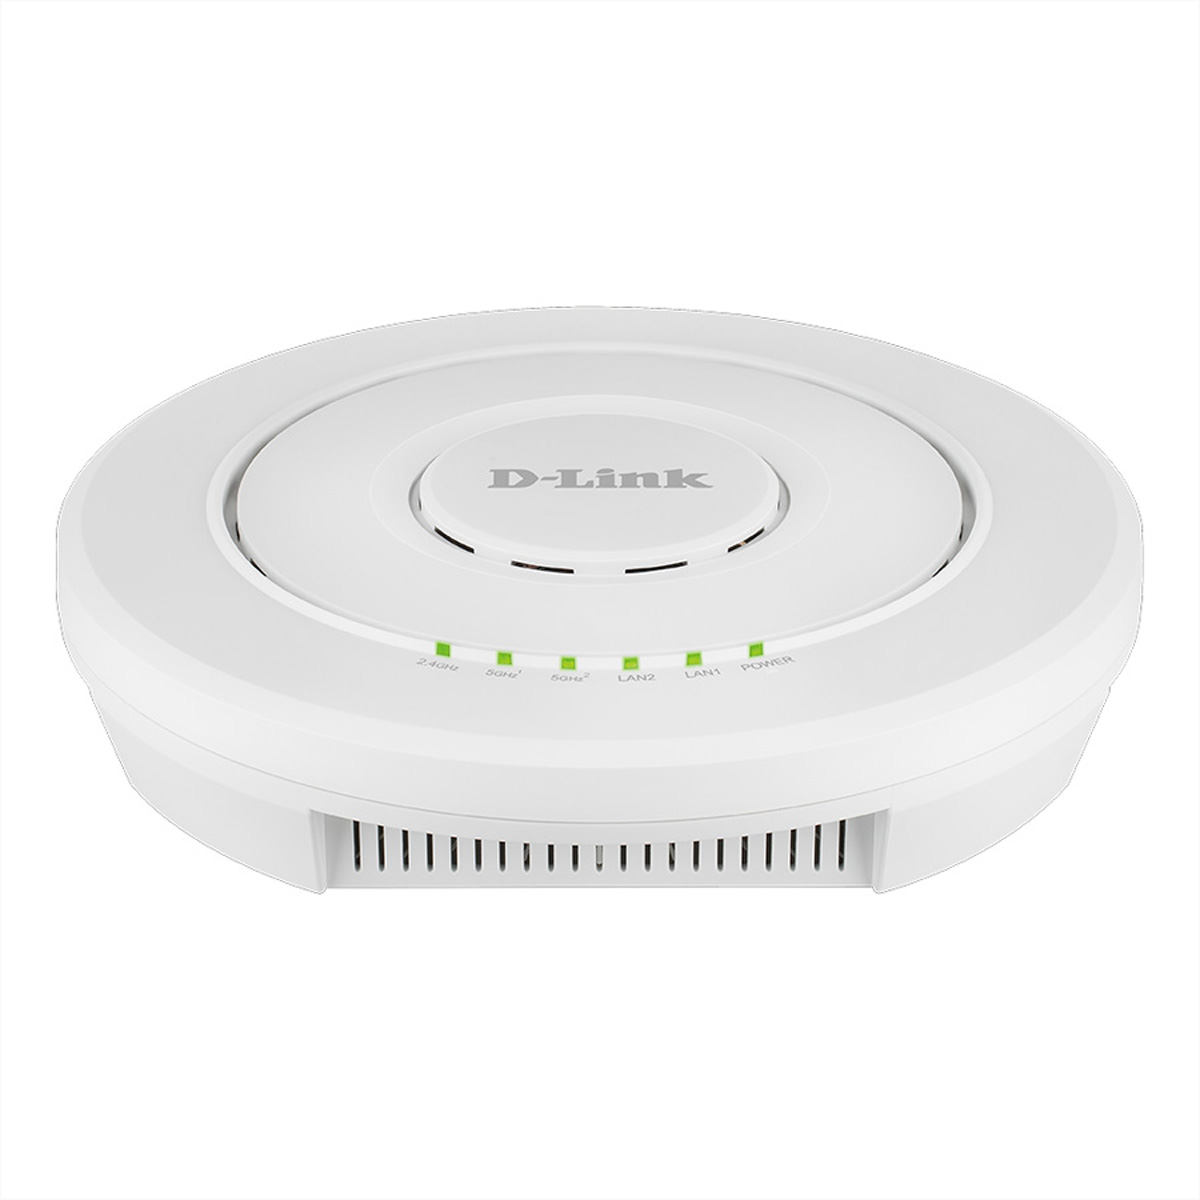 Access Wireless AC2200 DWL-7620AP Gbit/s Tri-Band 2,2 LAN D-LINK Wave2 Unified Point